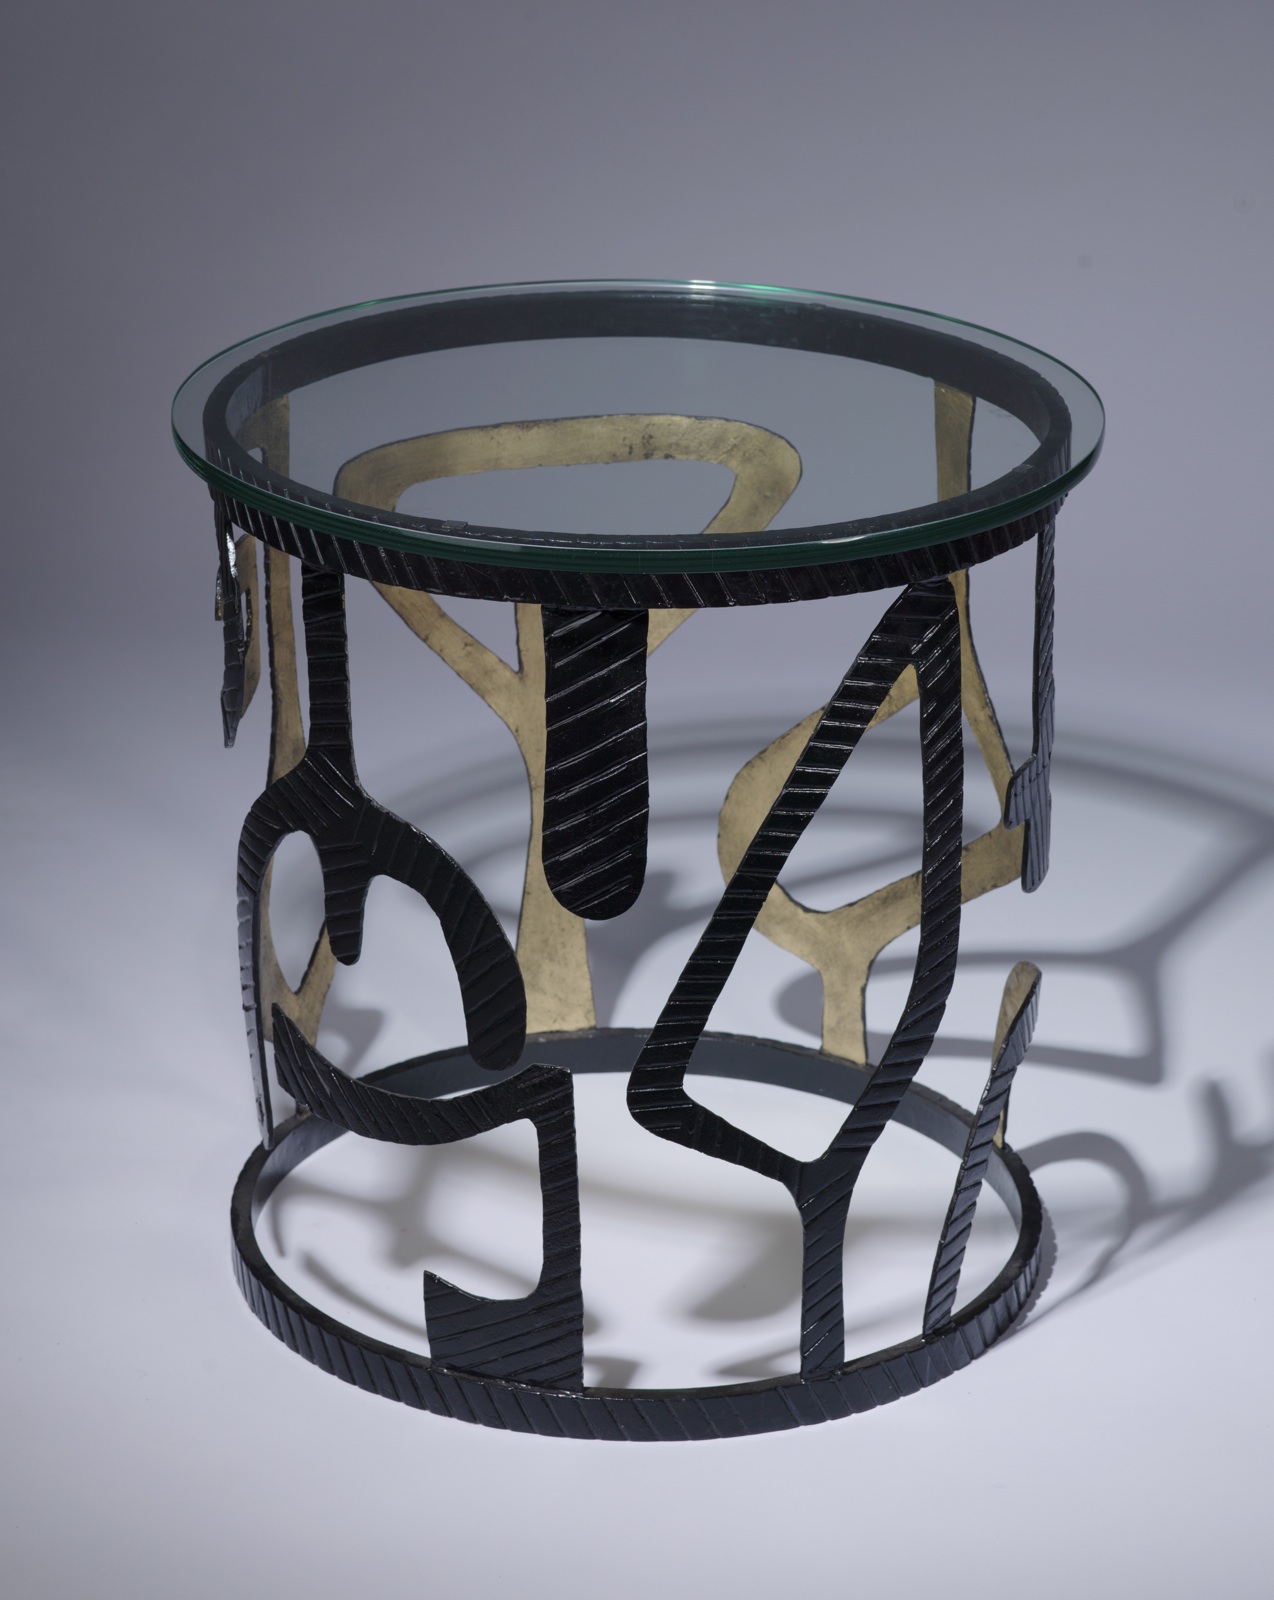 gold coffee table decor the terrific real black rod iron end tables and glass side elegant metal alluring wrought furniture continental few entrance half round pretty yellow